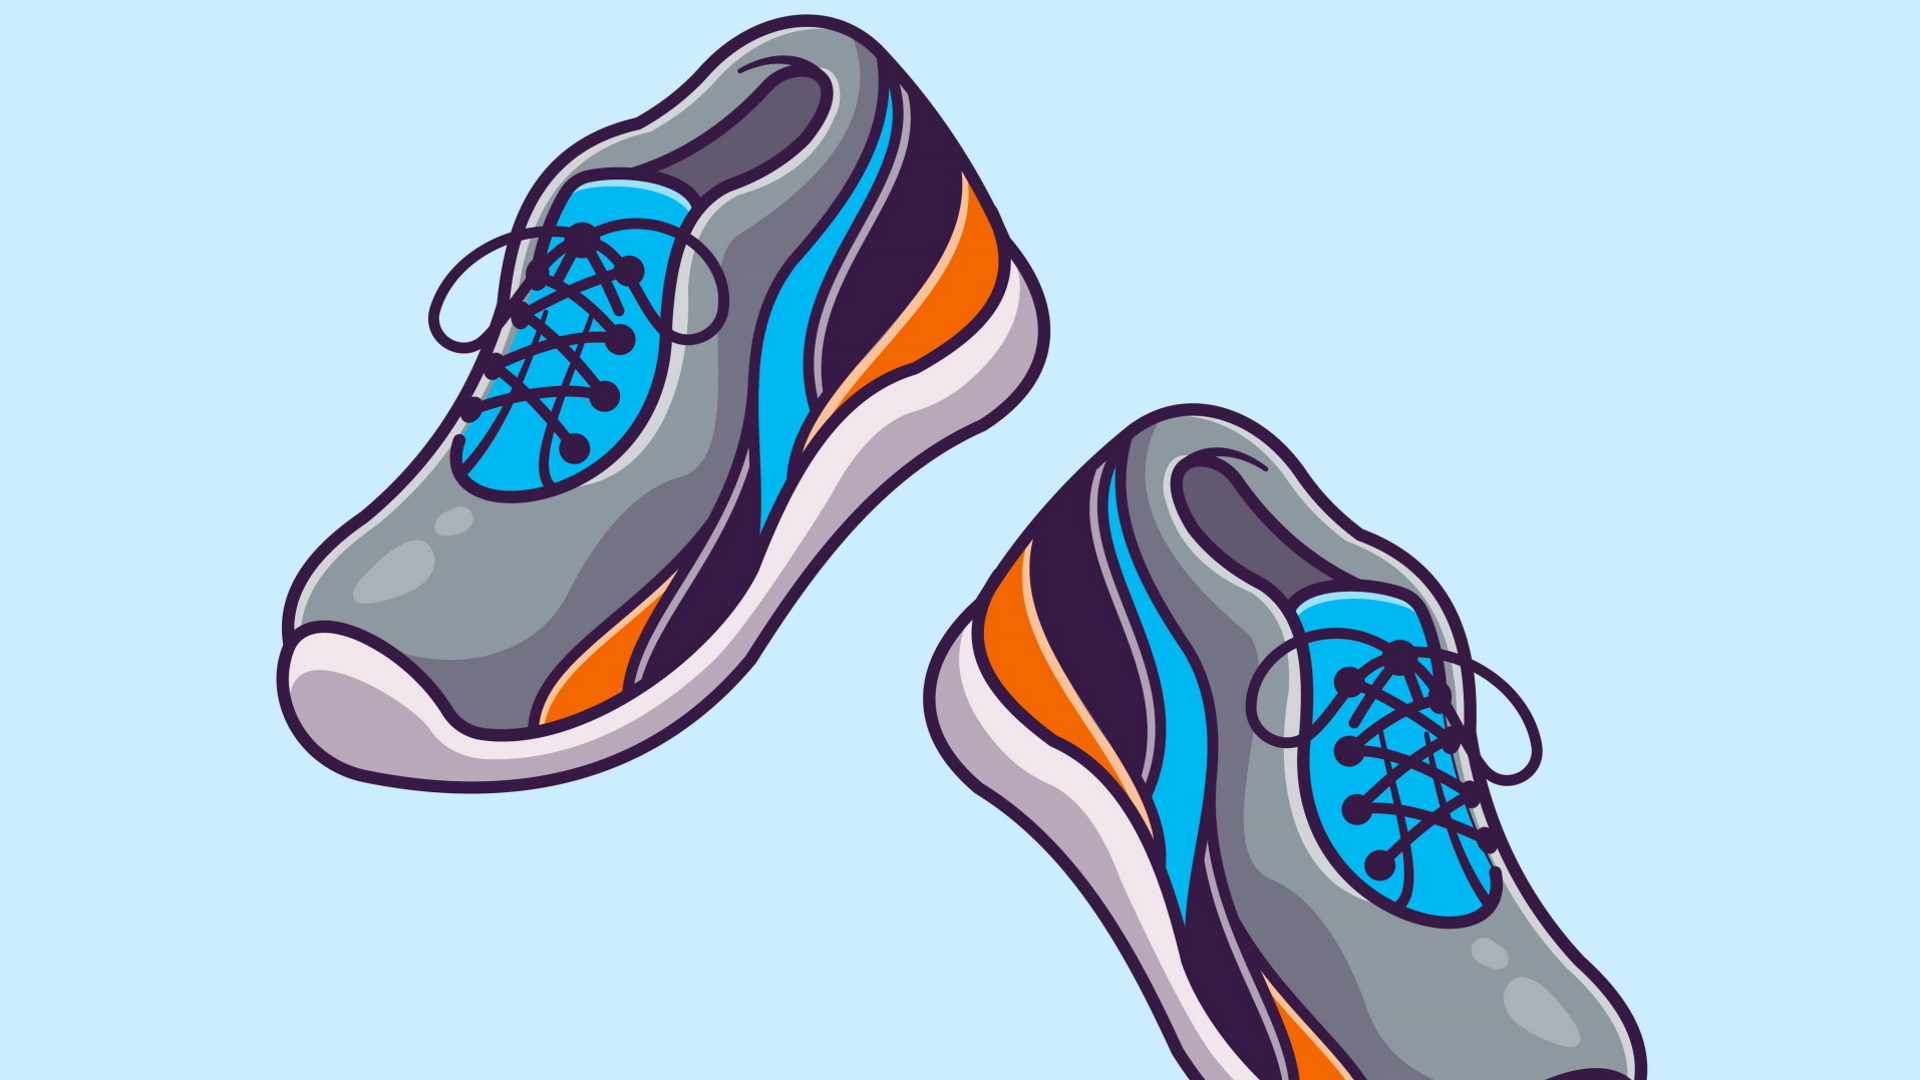 A pair of …trainers (and how far they can get you) Tim Murphey